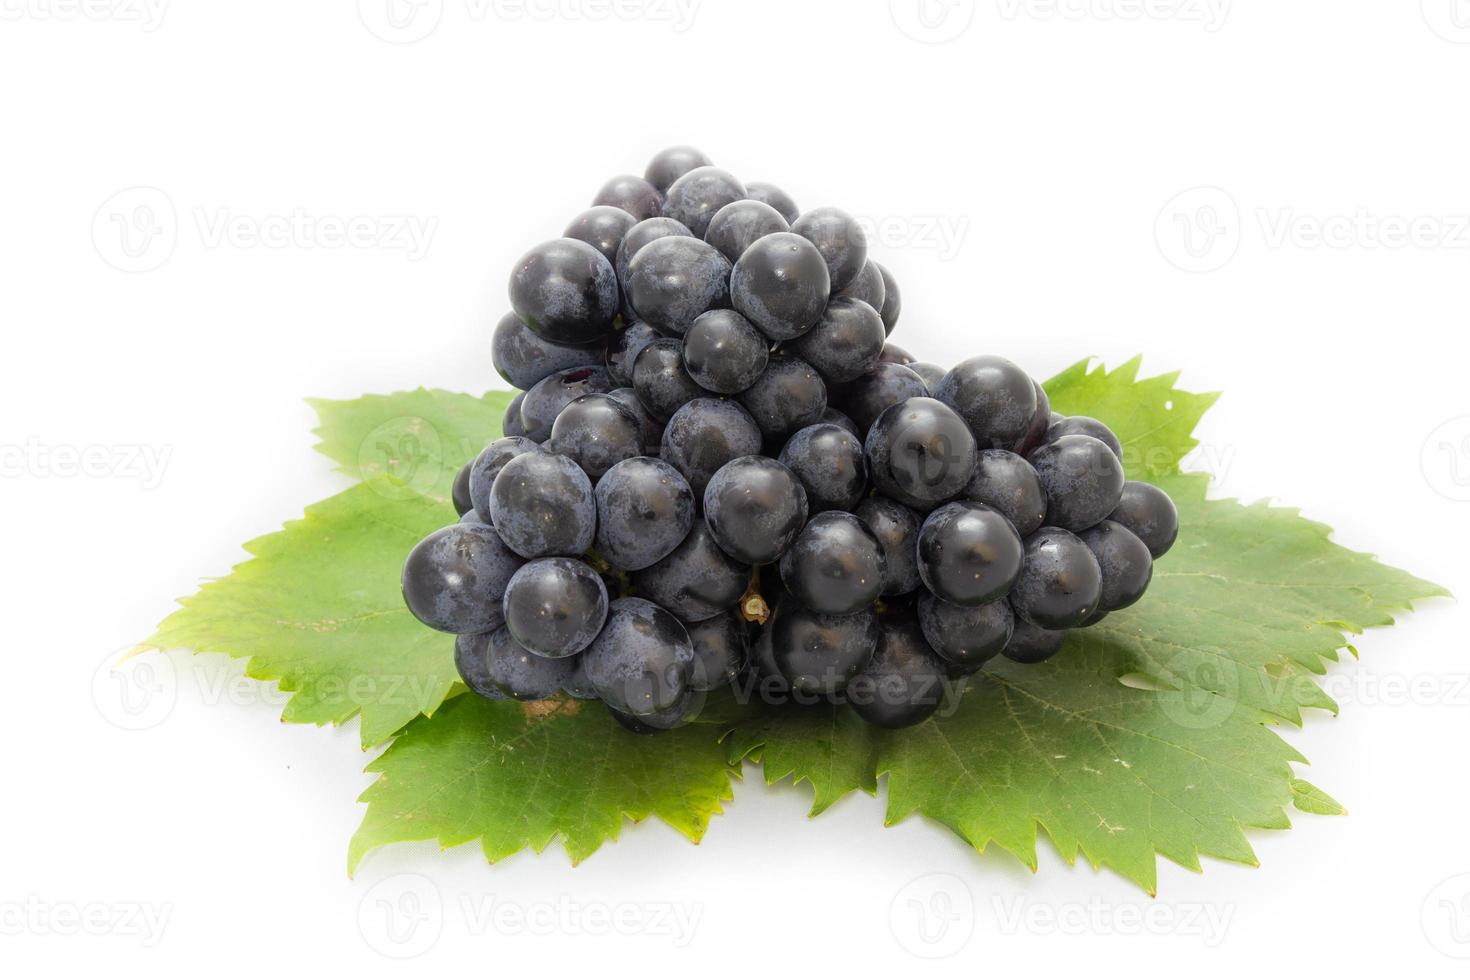 Black grapes bunch isolated on white background with green leaf package design element photo